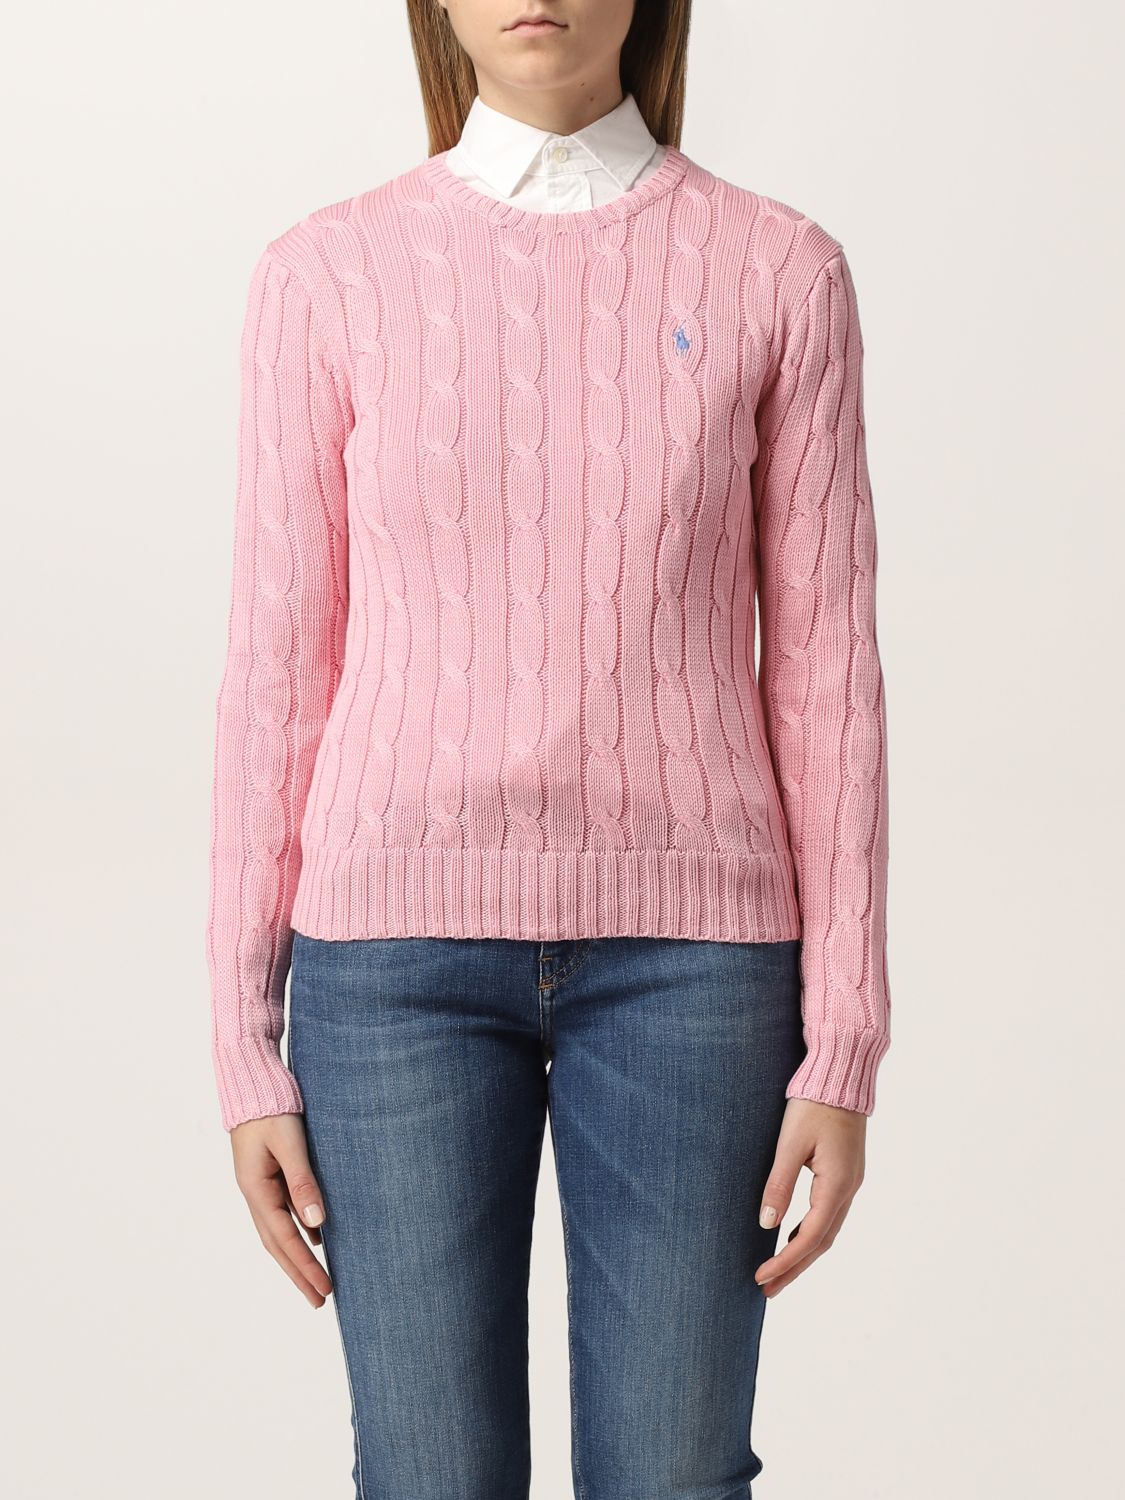 POLO RALPH LAUREN: cable sweater - Pink | Polo Ralph Lauren sweater  211580009 online on 